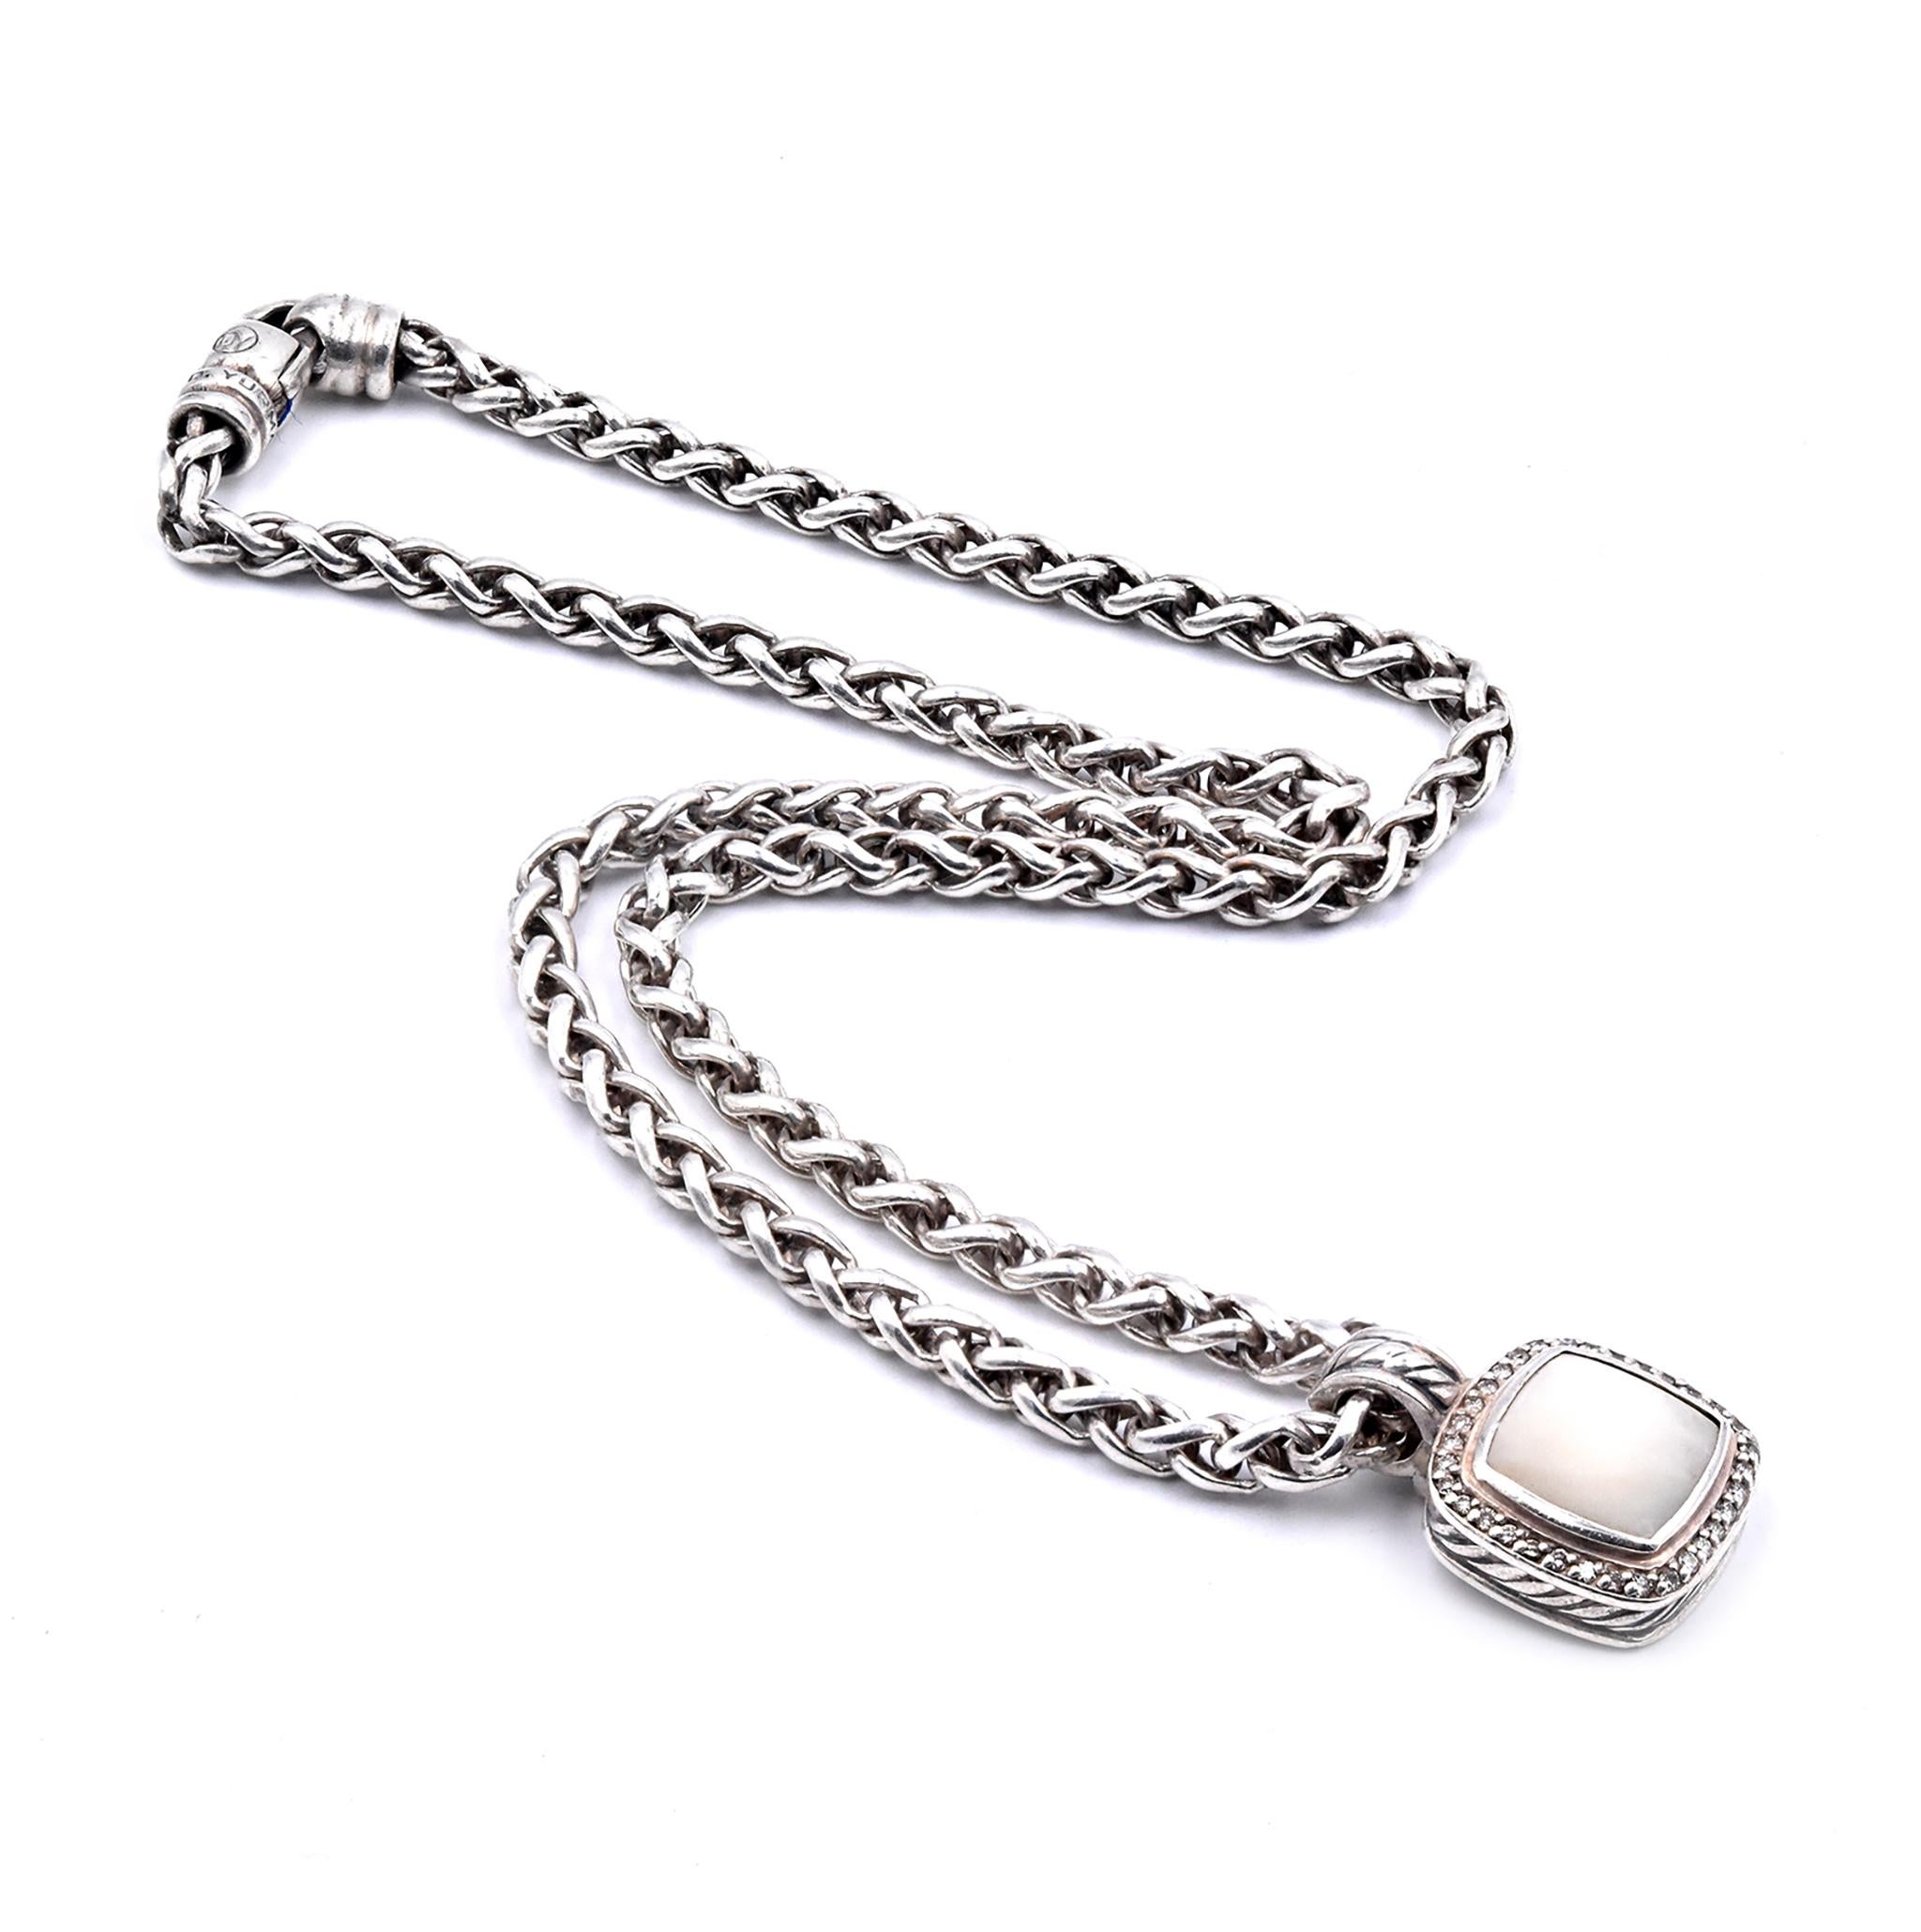 Designer: David Yurman
Material: sterling silver
Diamond: 32 round cut = .52cttw 
Color: G
Clarity: VS1
Weight: 31.23 grams
Measurement: necklace measures 16-inches long
